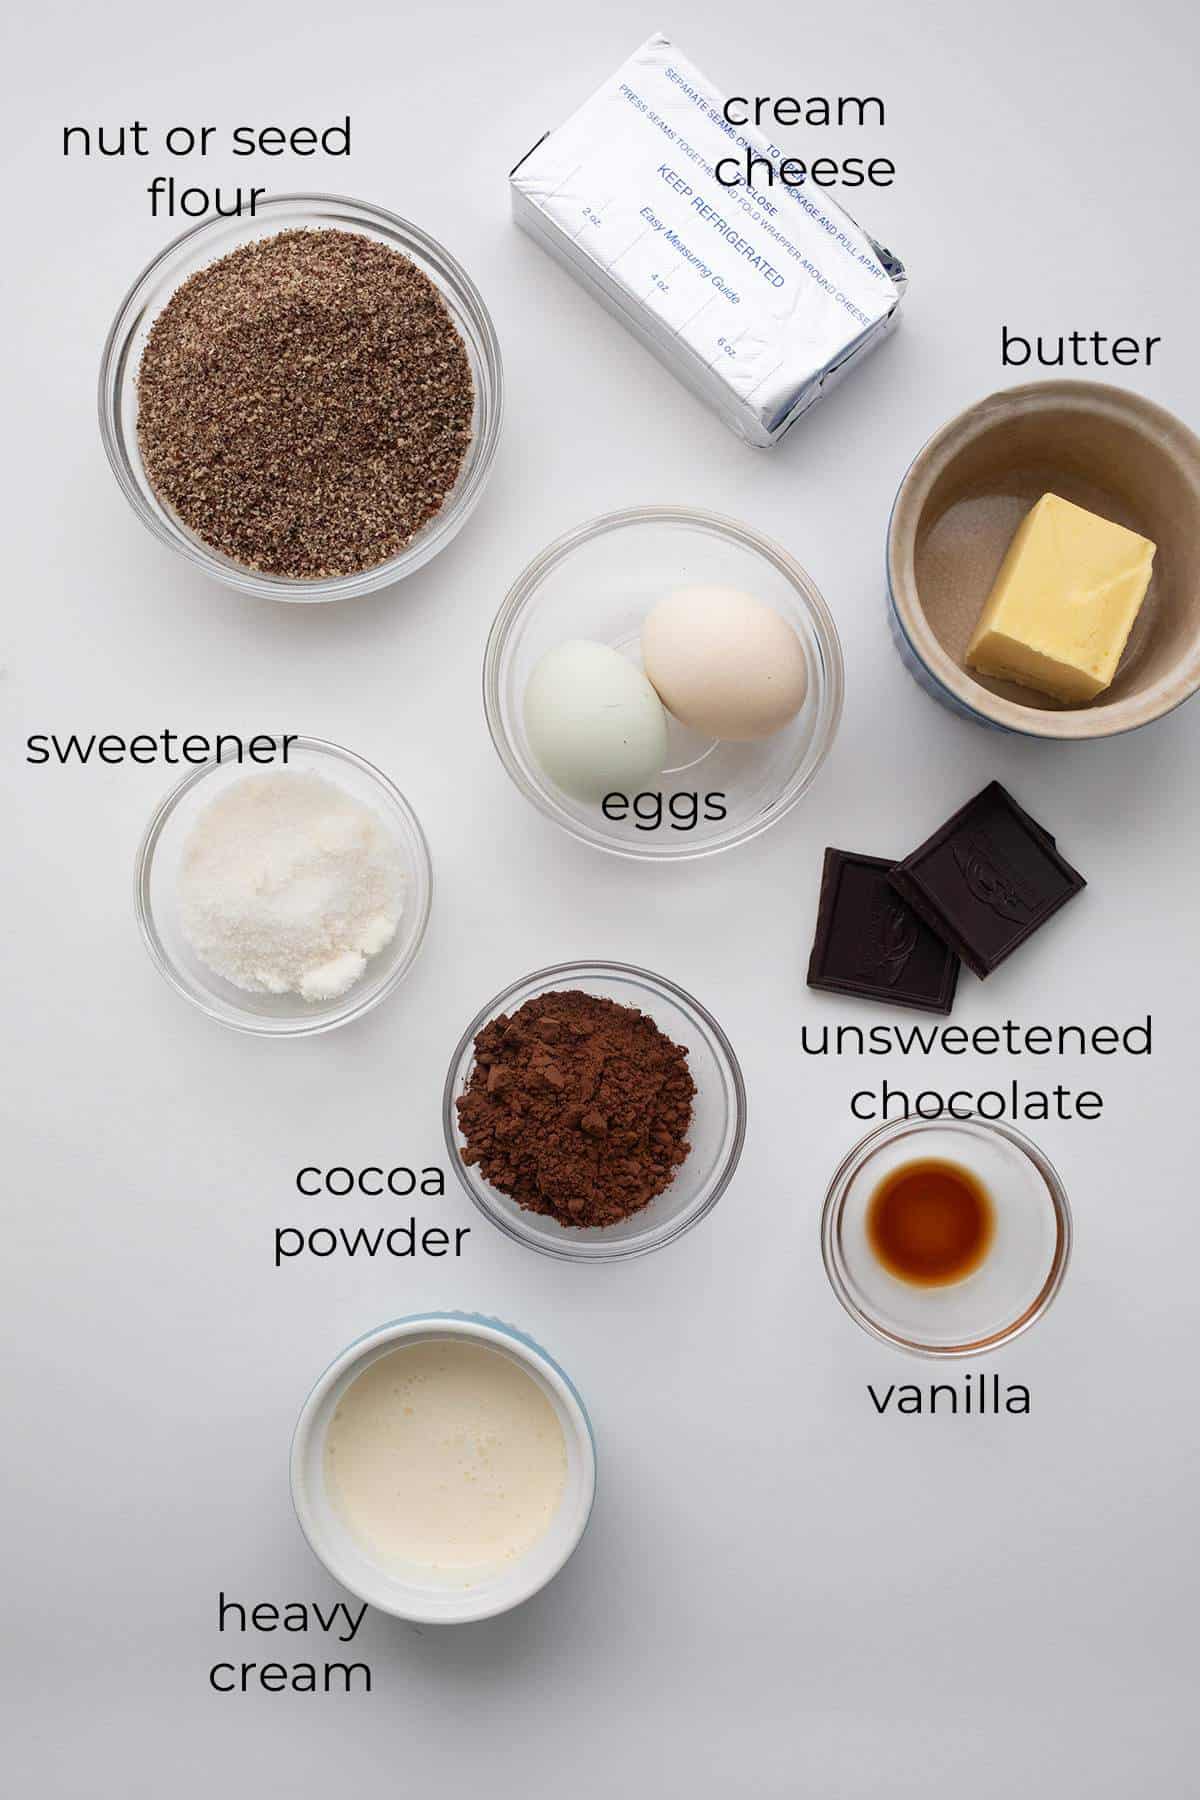 Top down image of ingredients needed for Keto Chocolate Cheesecake.